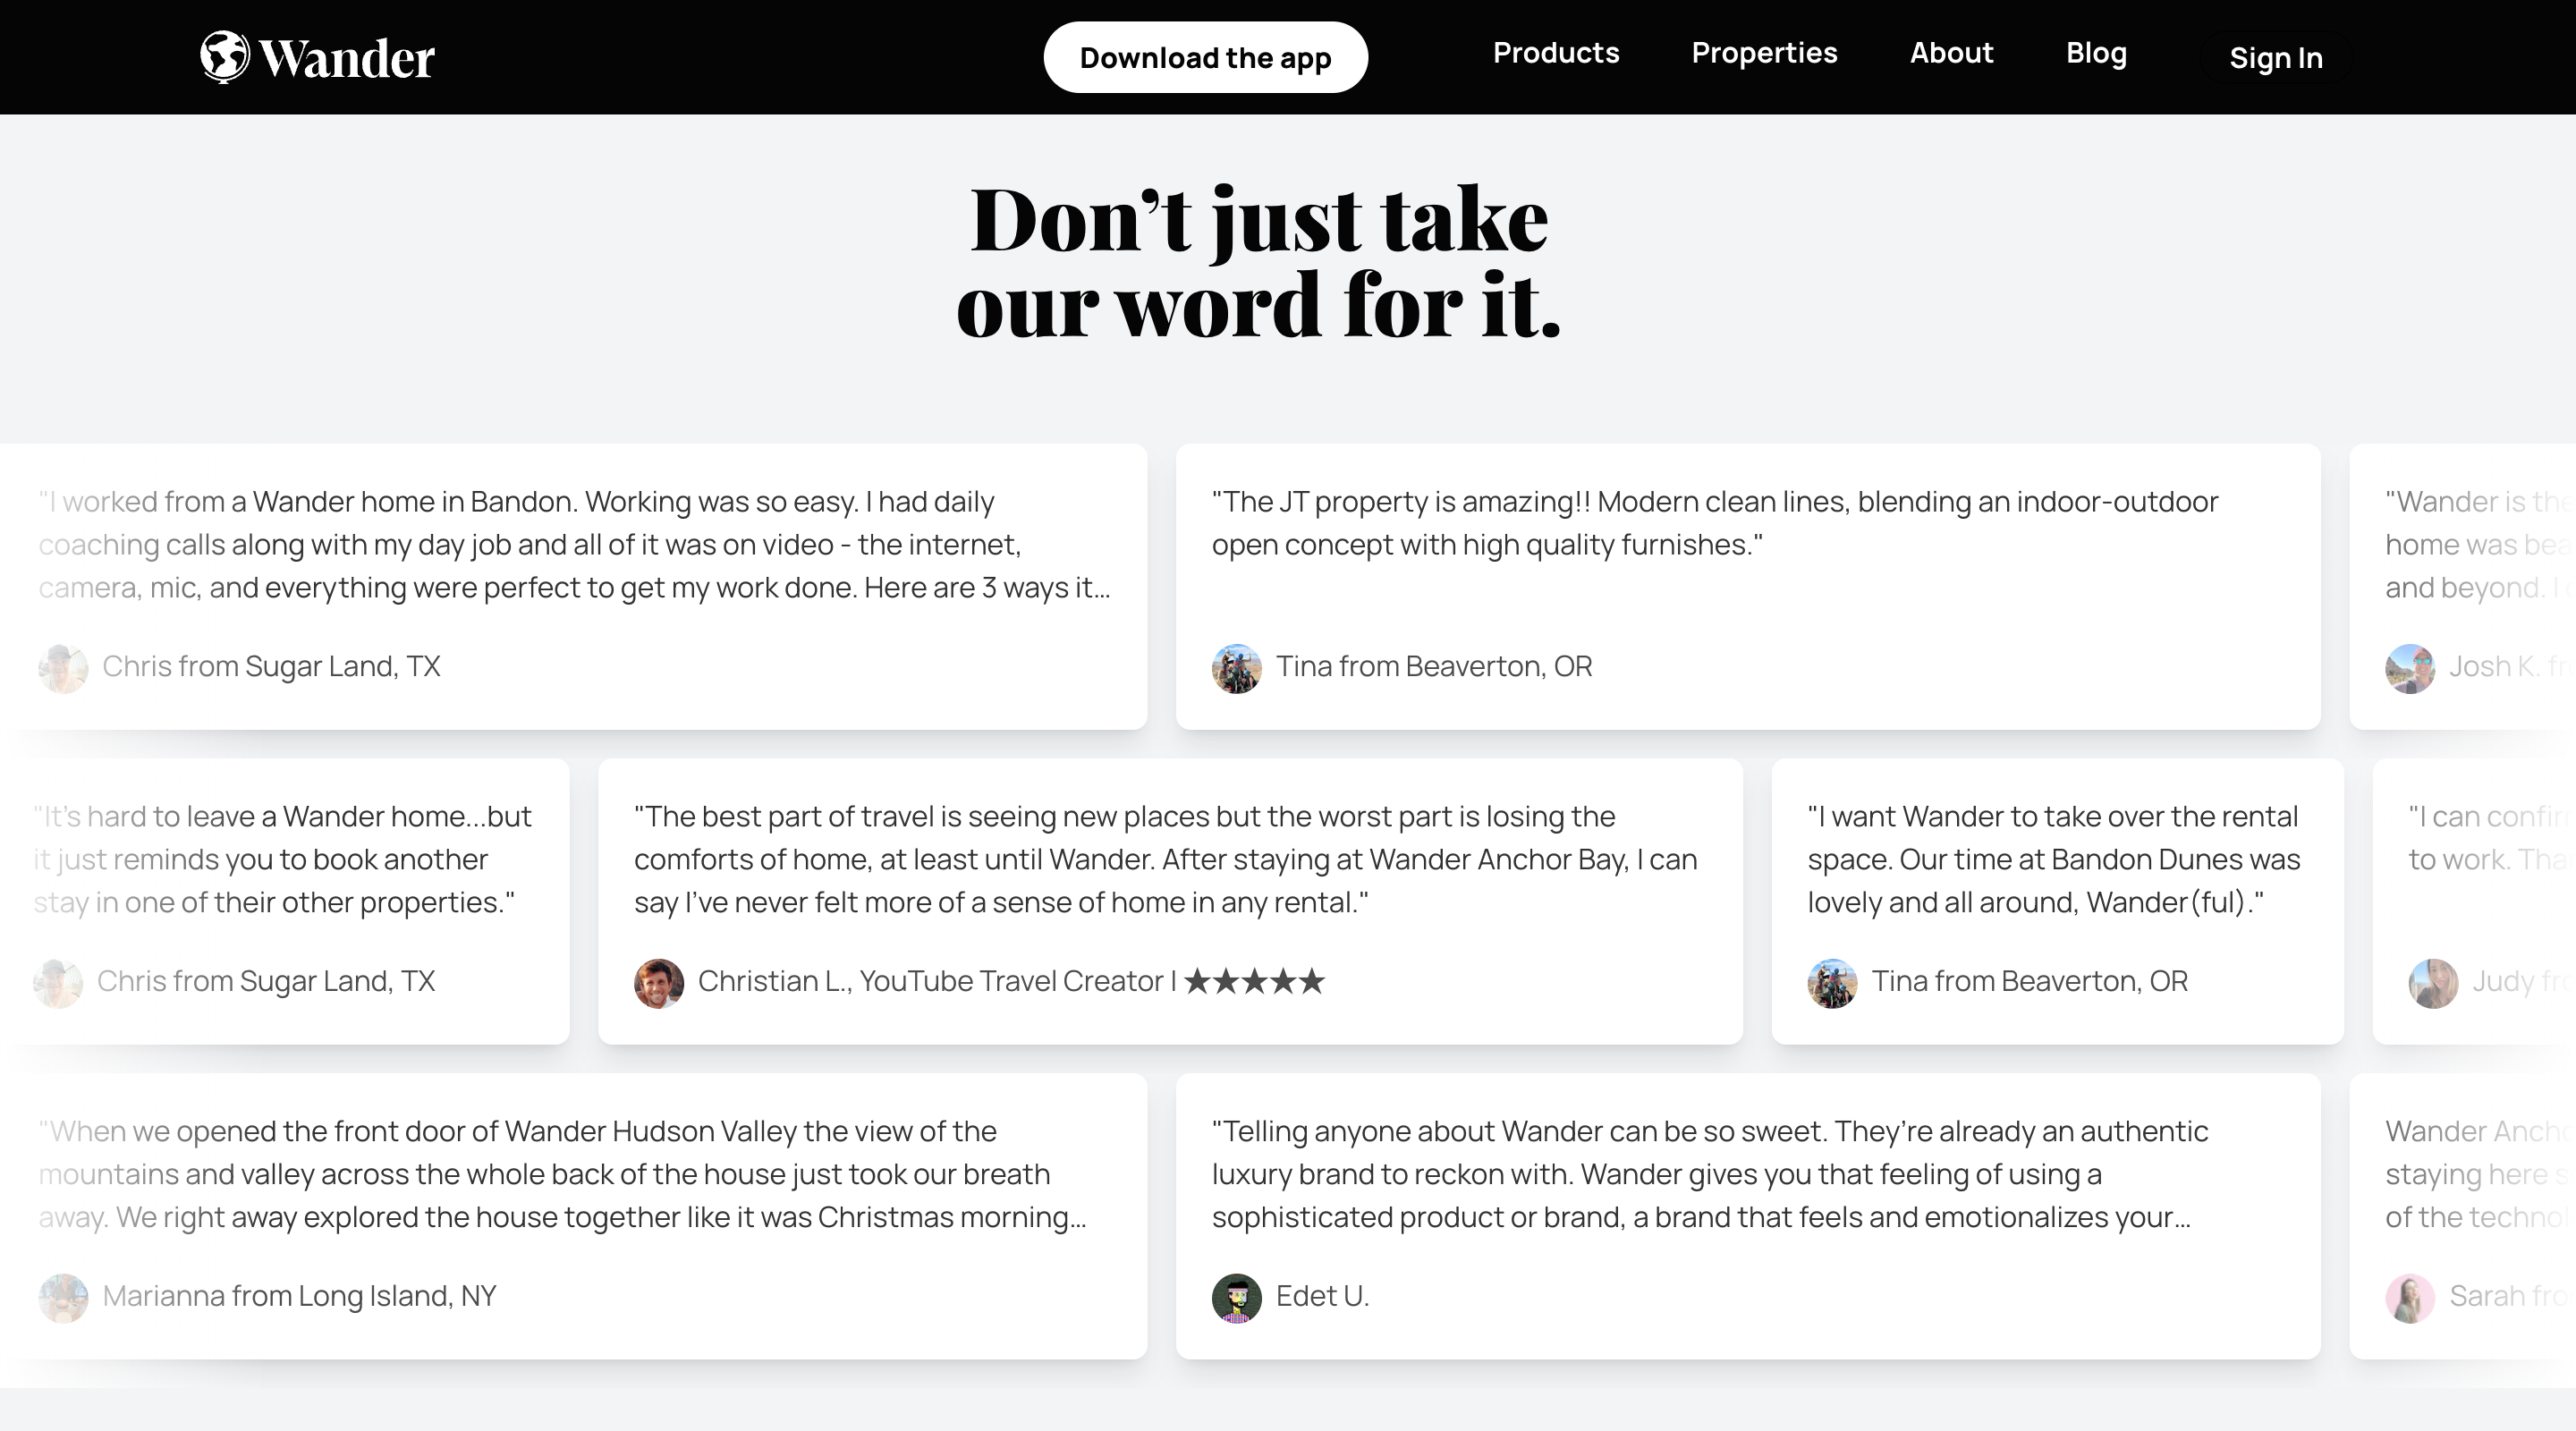 Testimonial section on the Wander website with three rows of testimonials animated to scroll horizontally. Each testimonial has a different width based on how long it is.